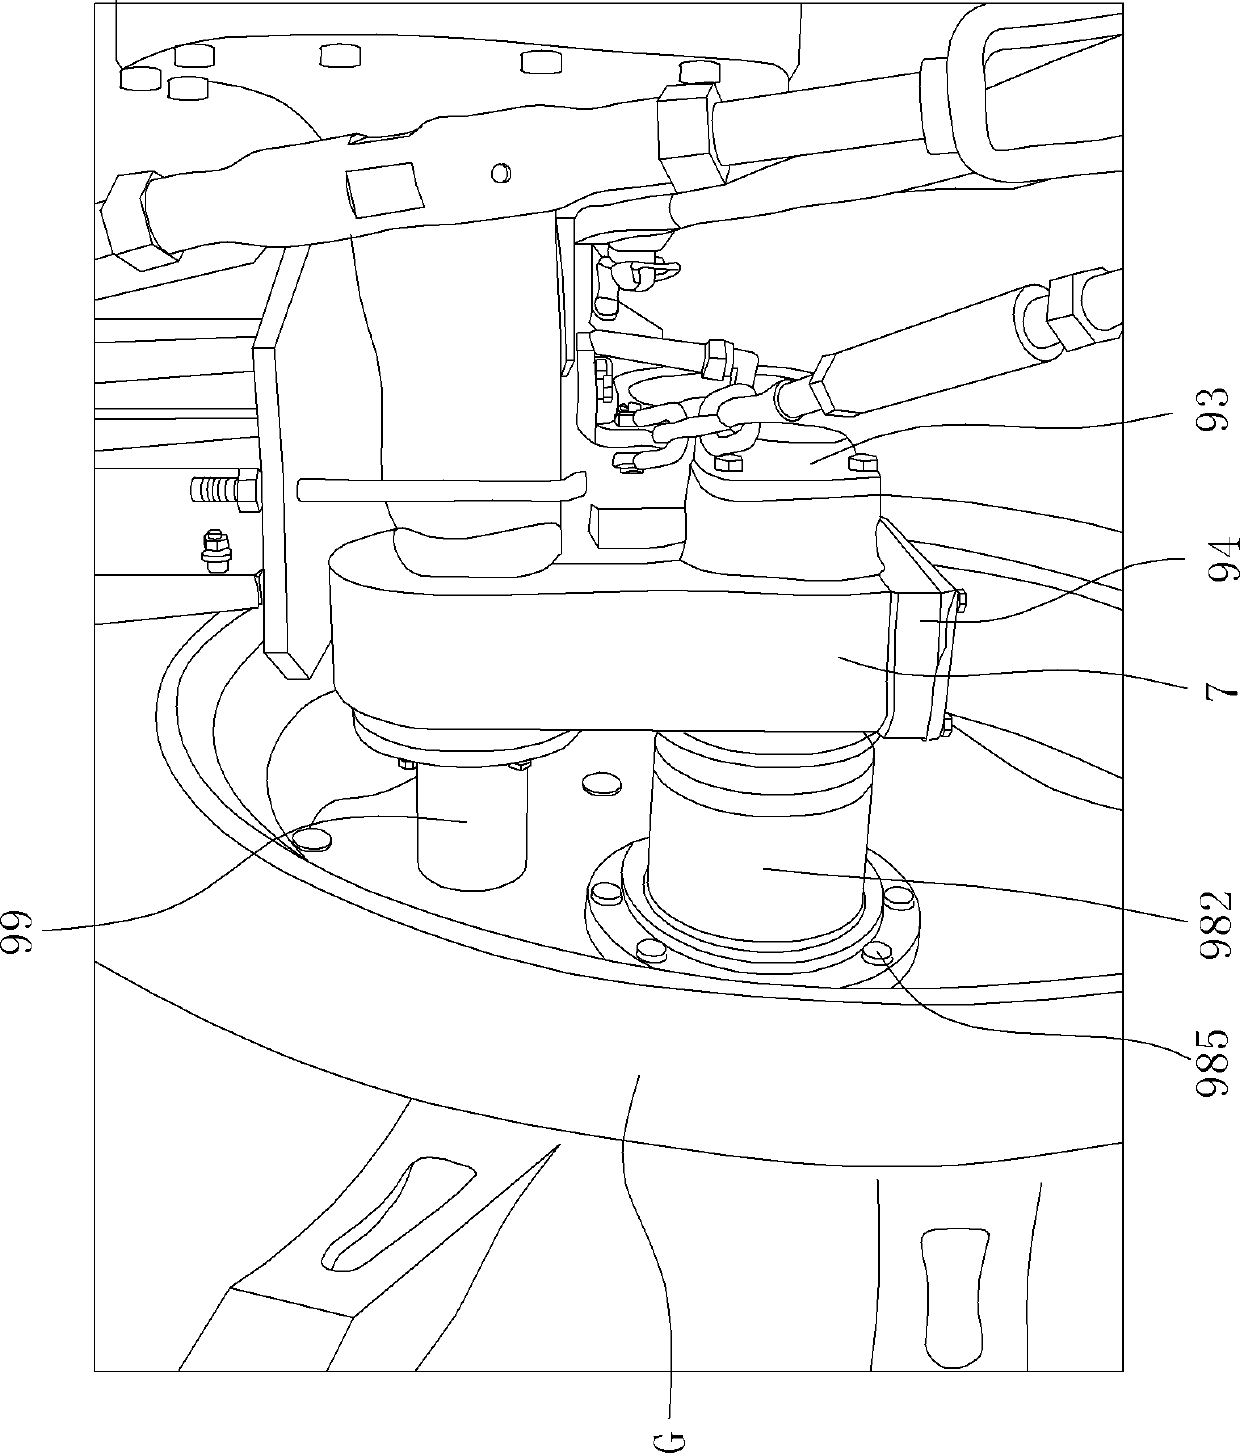 Ground-clearance-adjustable tractor transmission system